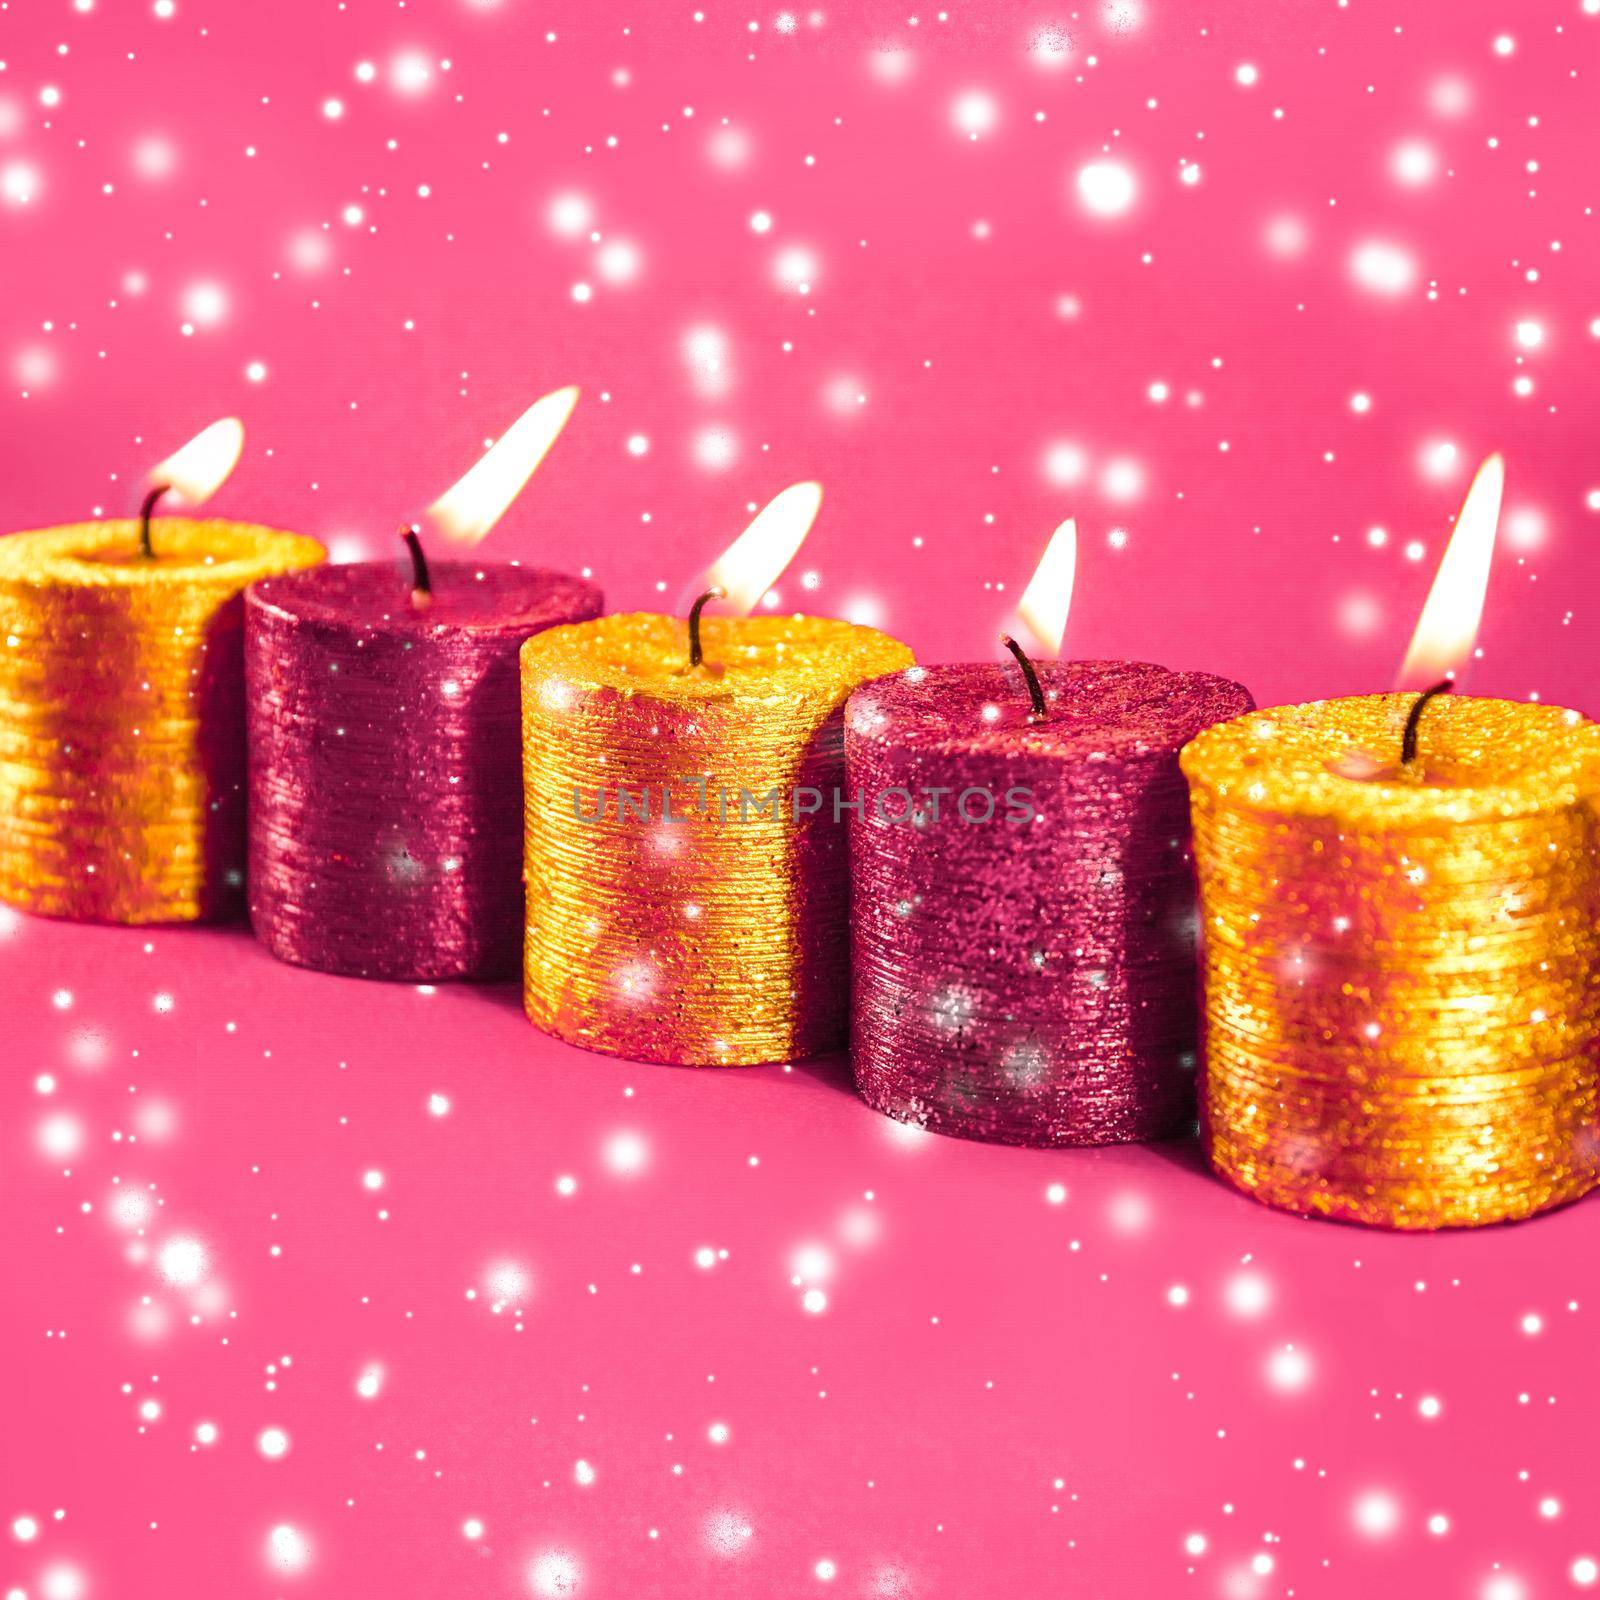 Winter, celebration and new years eve concept - Christmas candles and shiny snow on pink background, holiday season decoration